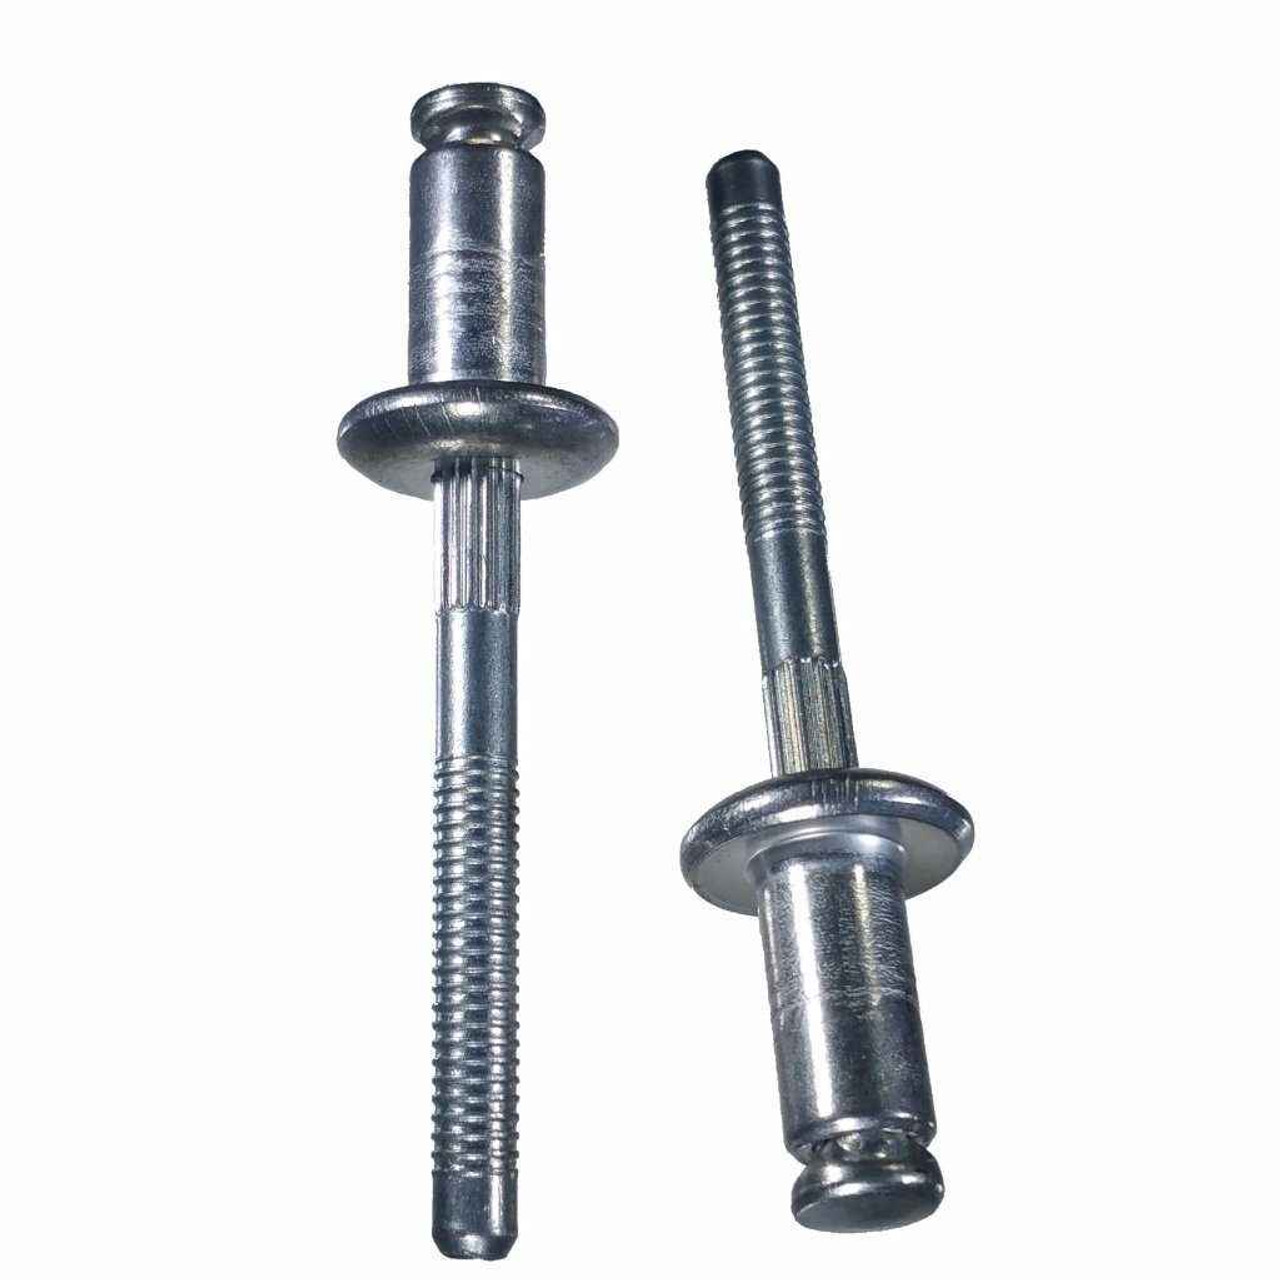 Wholesale Stainless Steel Screw Rivets 